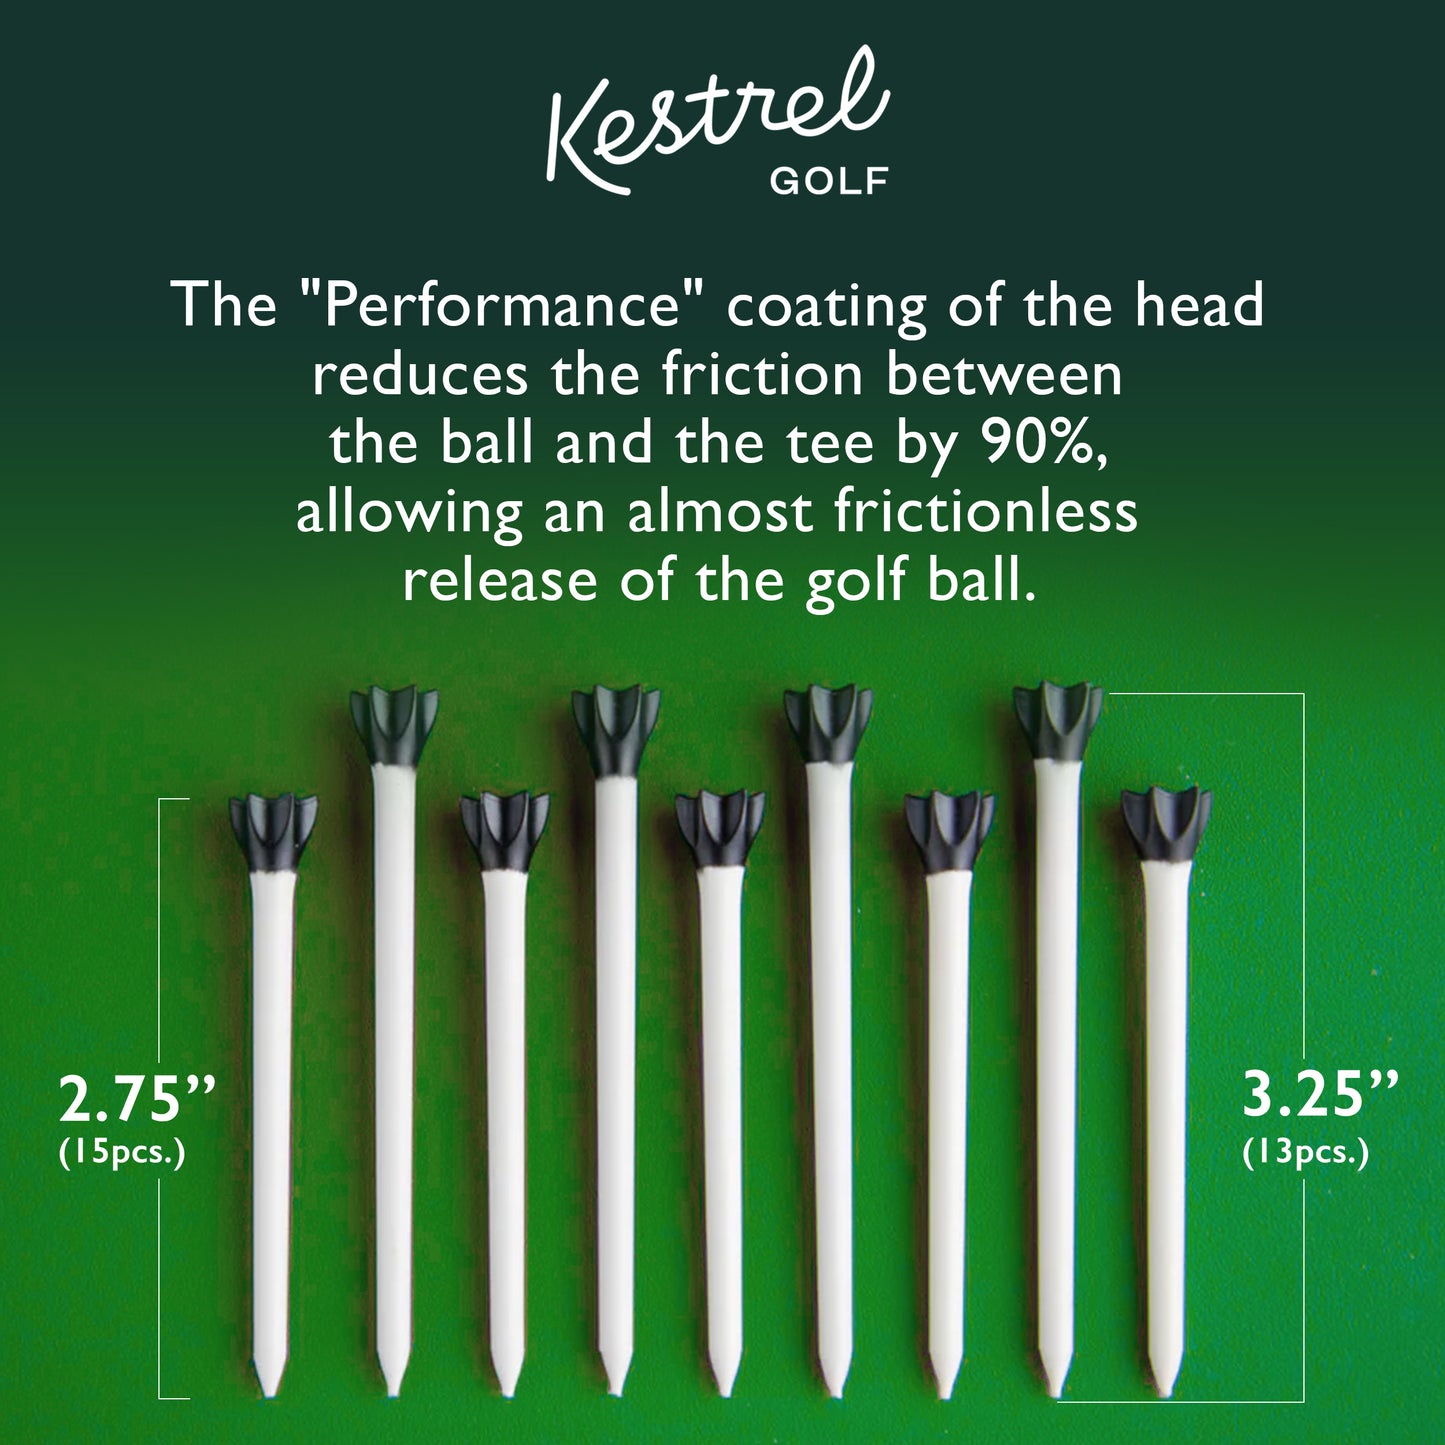 Performance Tee Pack - Lasts Longer, Reduce Spin, Drive Further